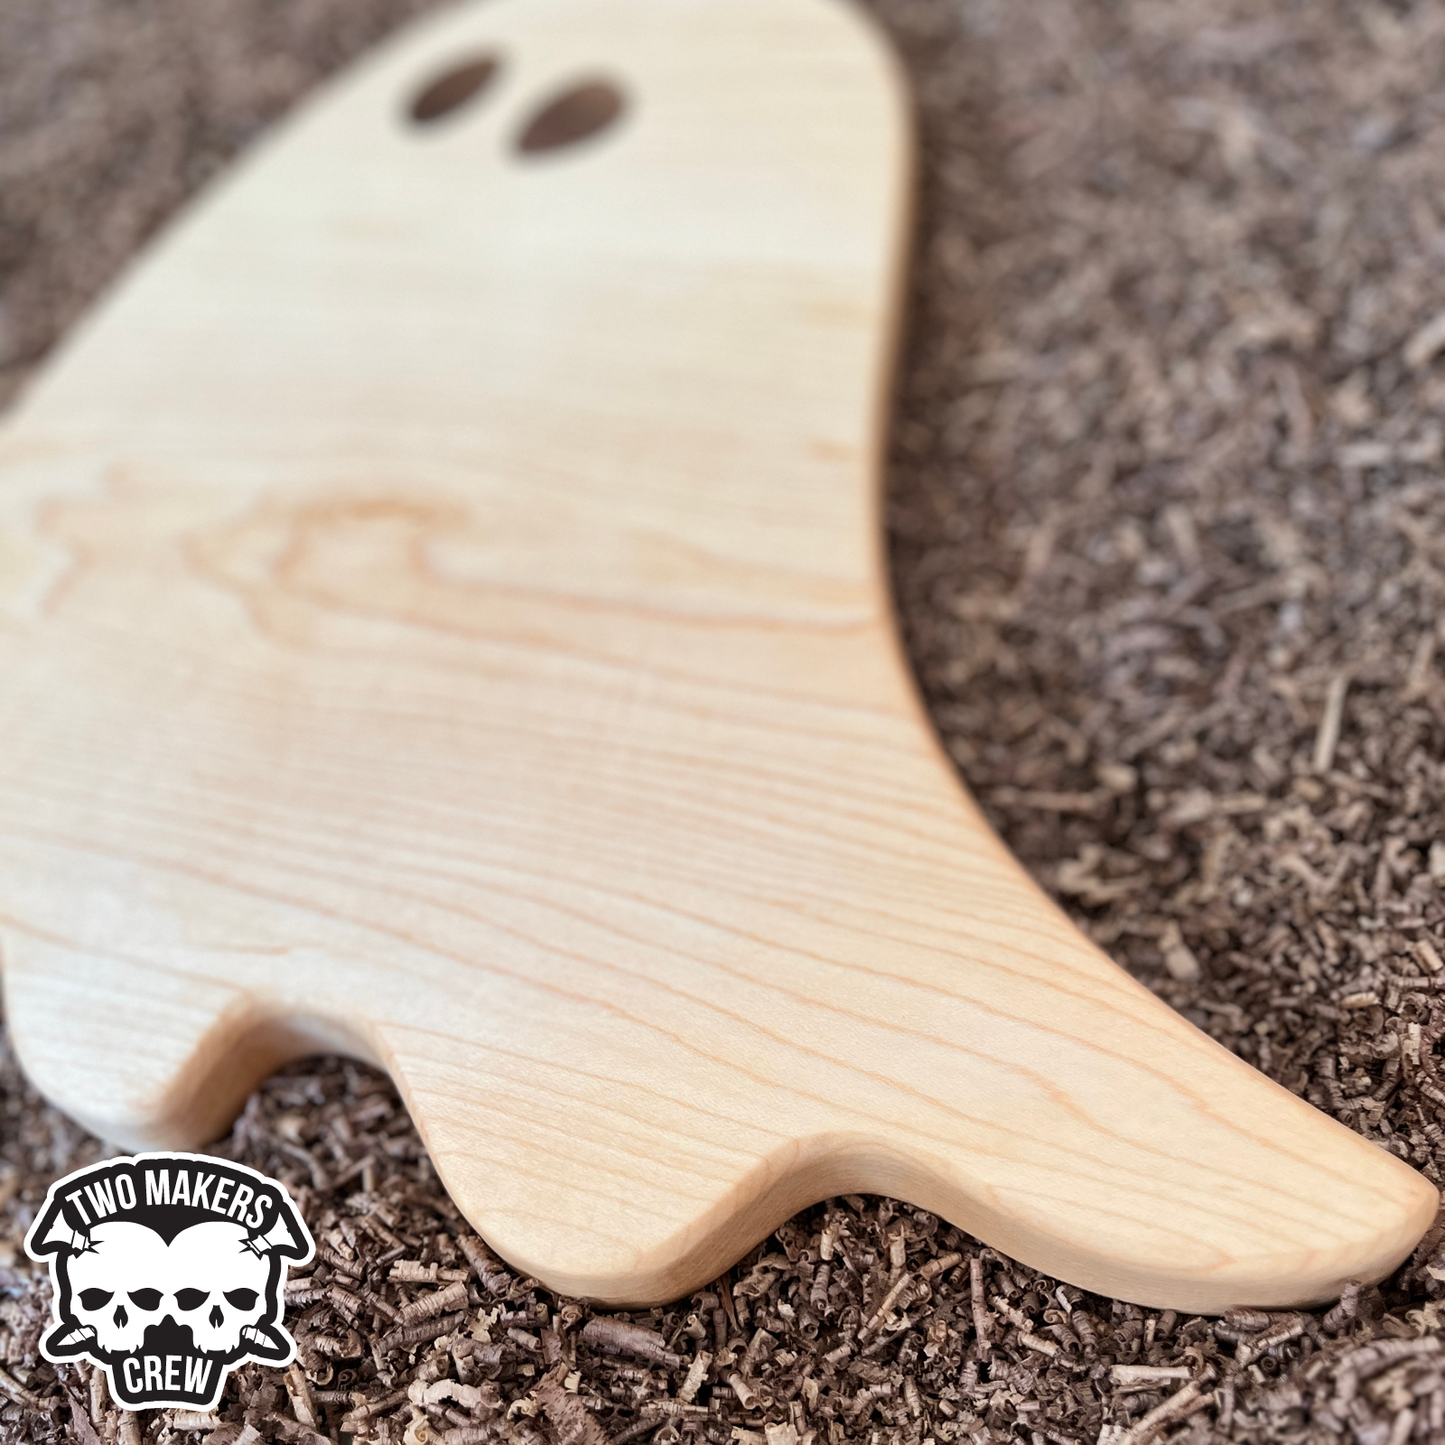 The Ghostly Gourmet - Halloween Charcuterie/Cutting/Serving Boards